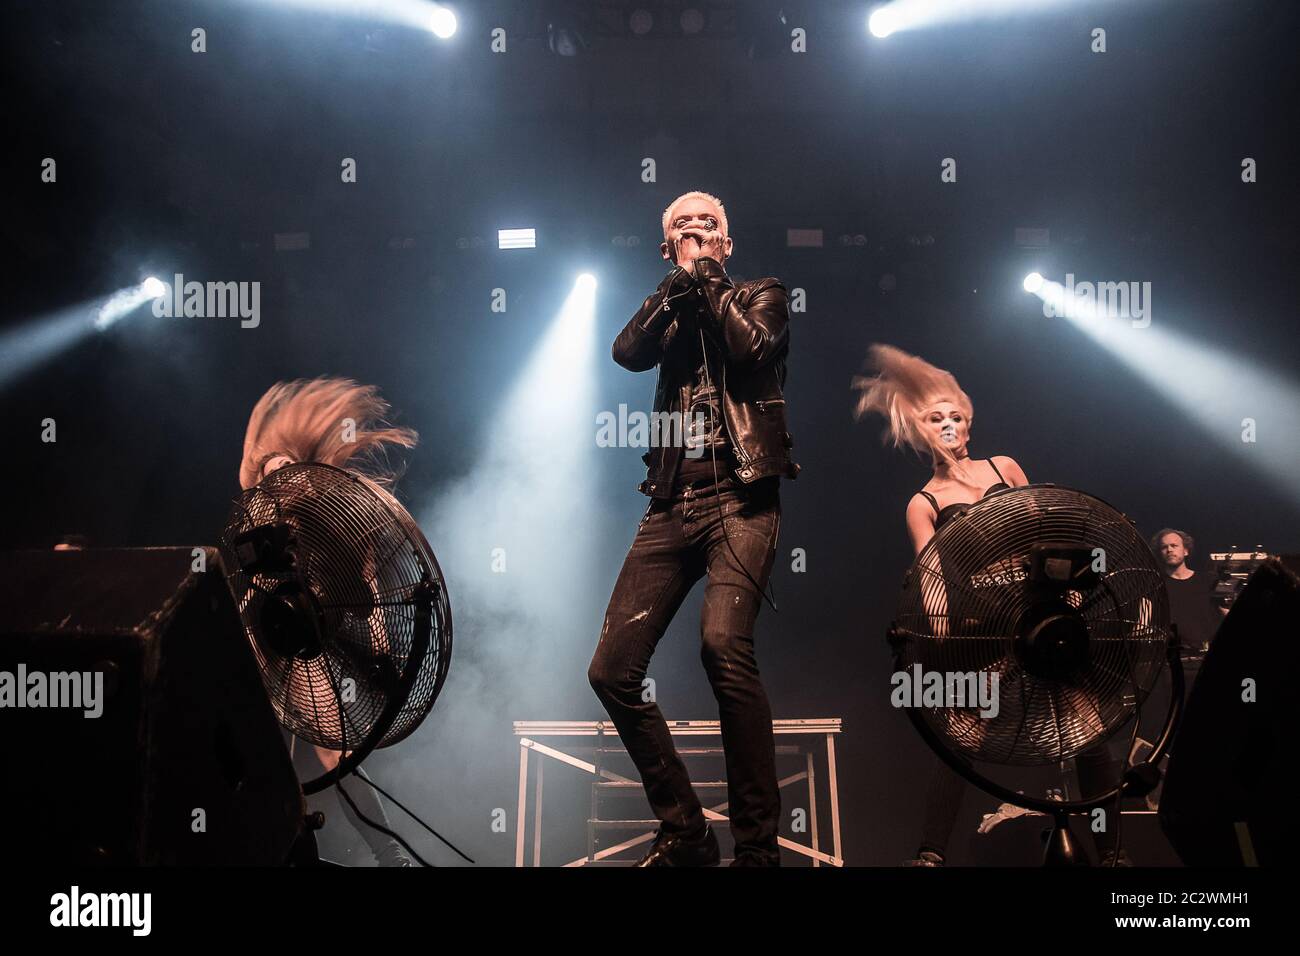 Odense, Denmark. 11th, February 2017. The German dance group Scooter  performs a live concert during the event Vi Elsker Hardcore at Odense  Idrætshal in Odense. Here vocalist H.P. Baxxter is seen live